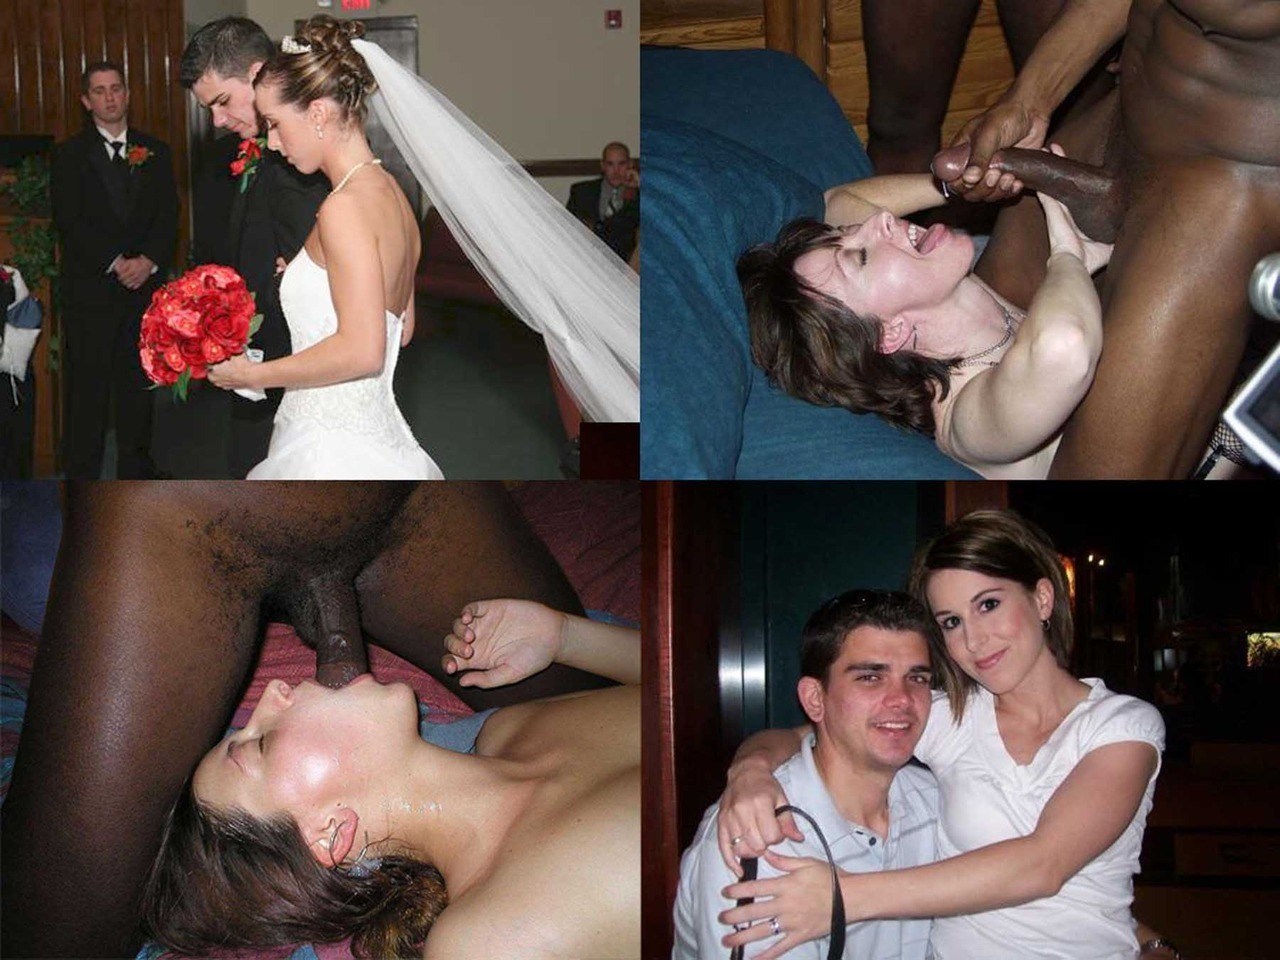 Sex with his wife on their wedding night (49 photos)